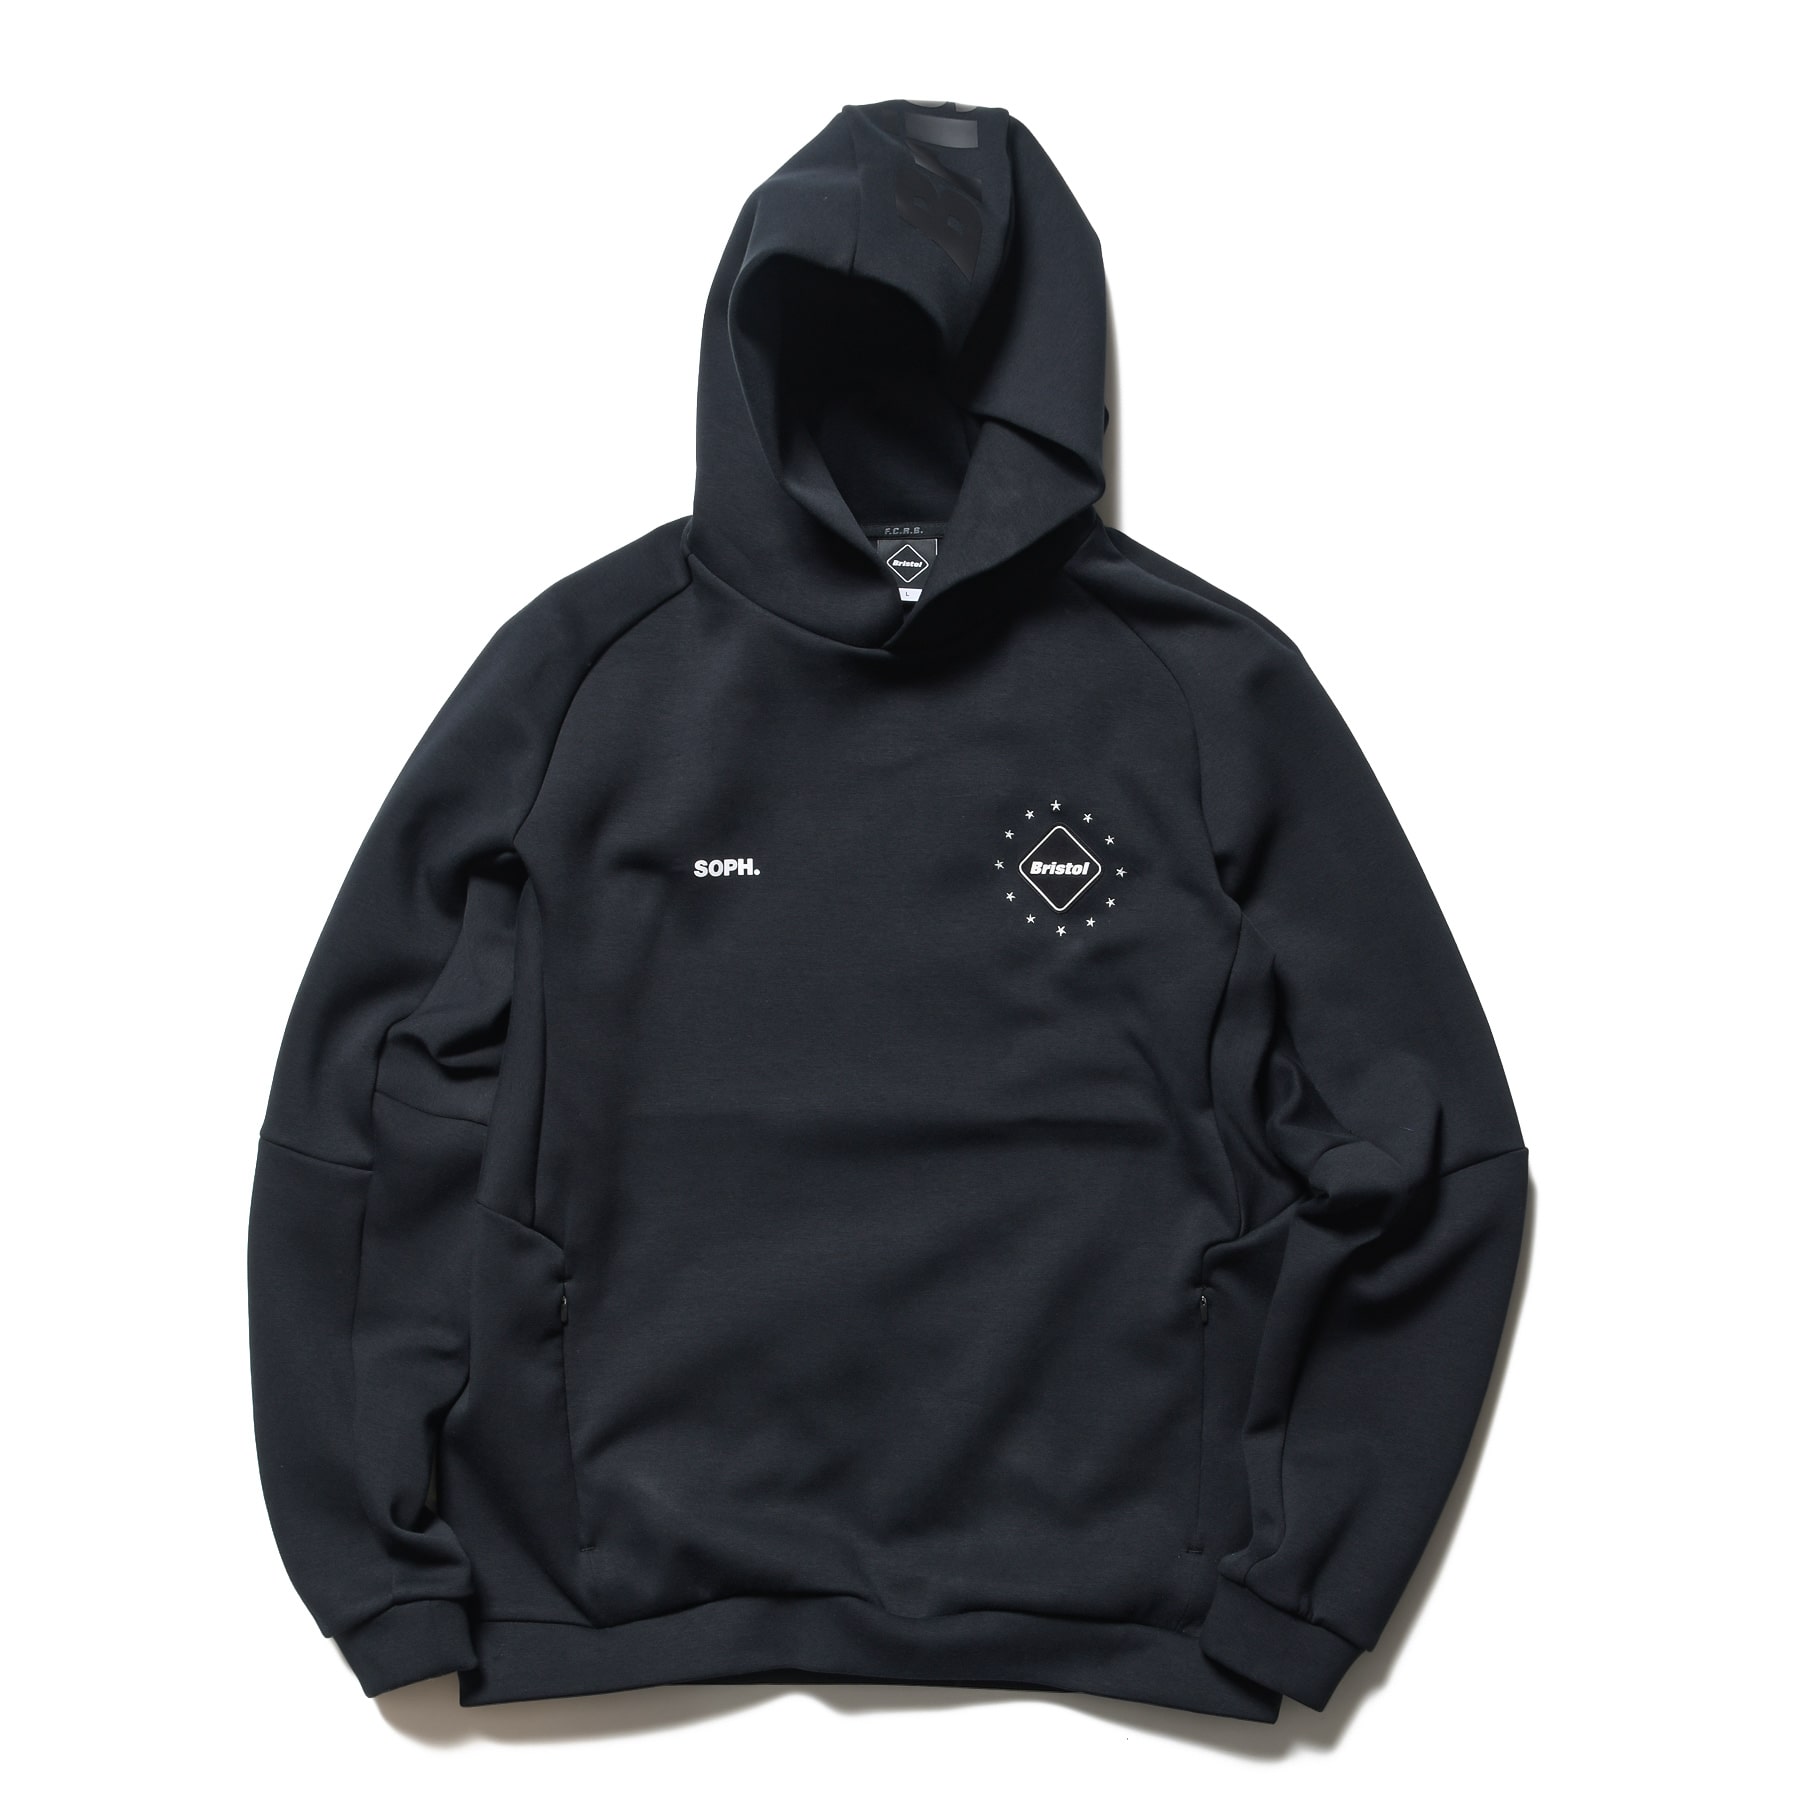 M FCRB 20AW SWEAT TRAINING HOODIE BLACK | foundationopportunities.org